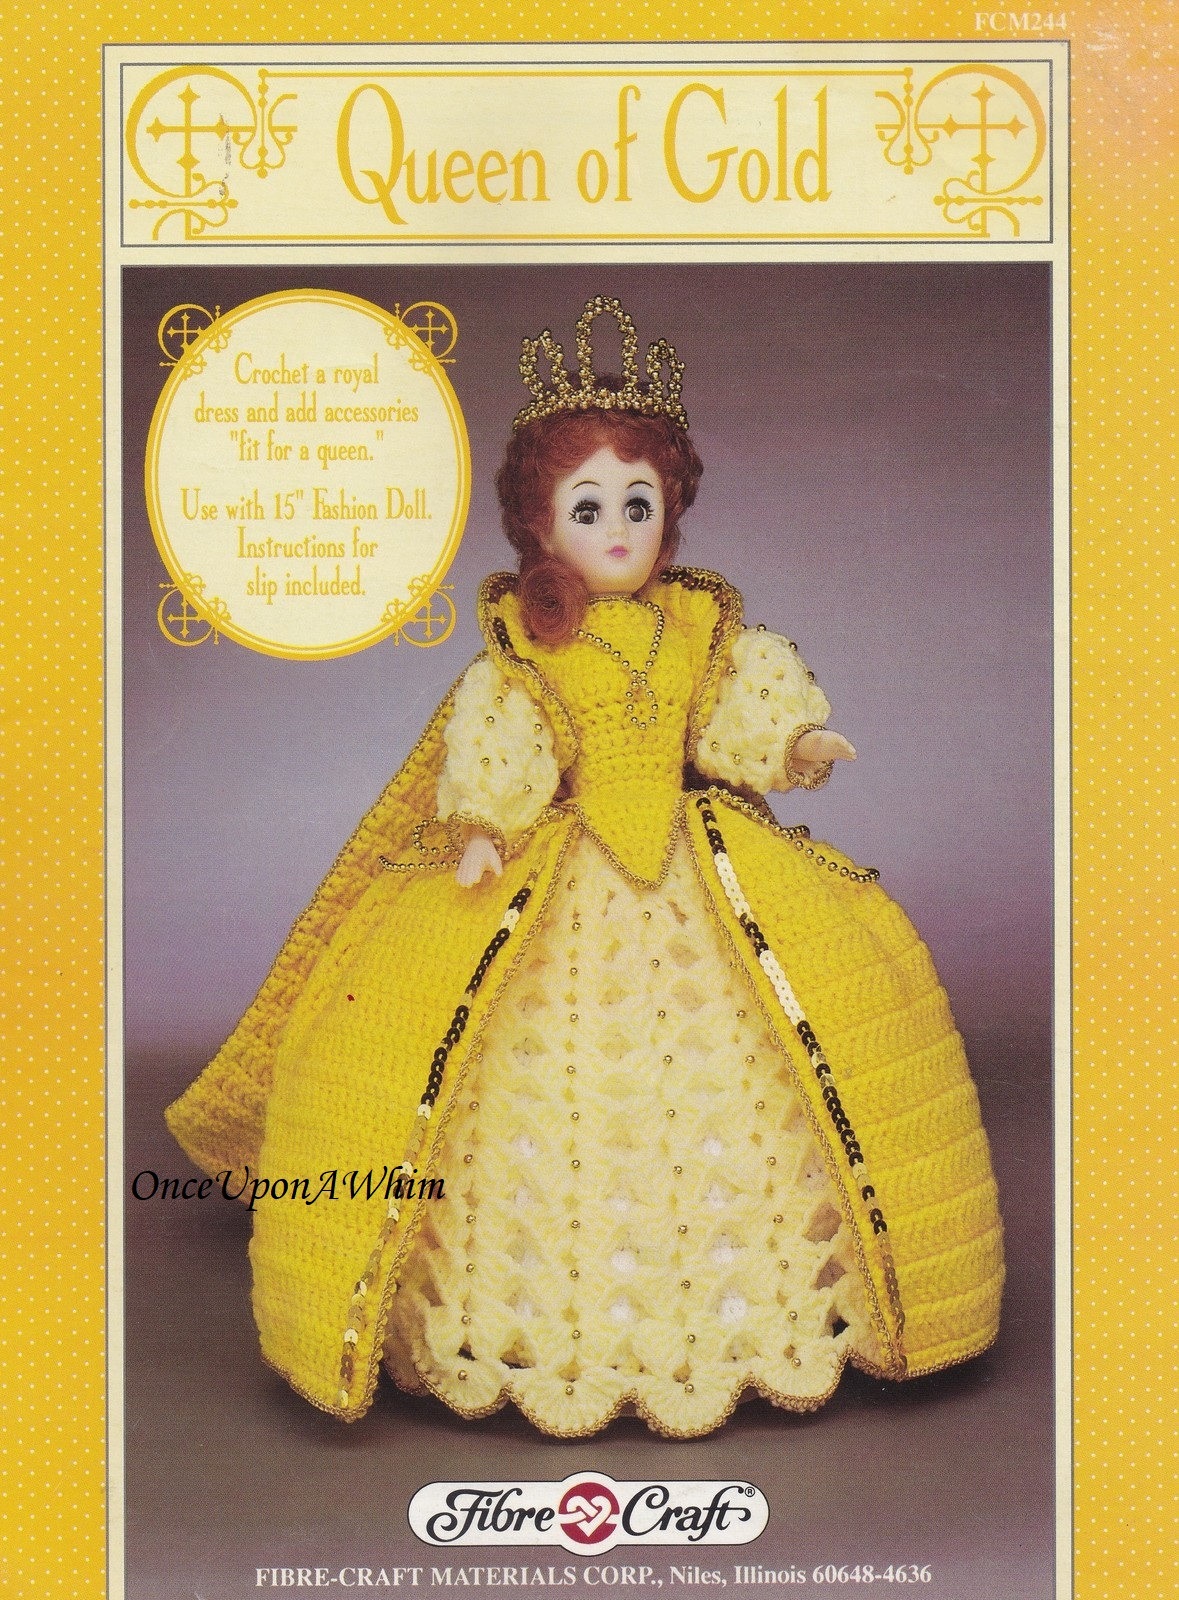 Queen of Gold, Fibre Craft Crochet Fashion Doll Clothes Pattern Booklet FCM244  - $3.95